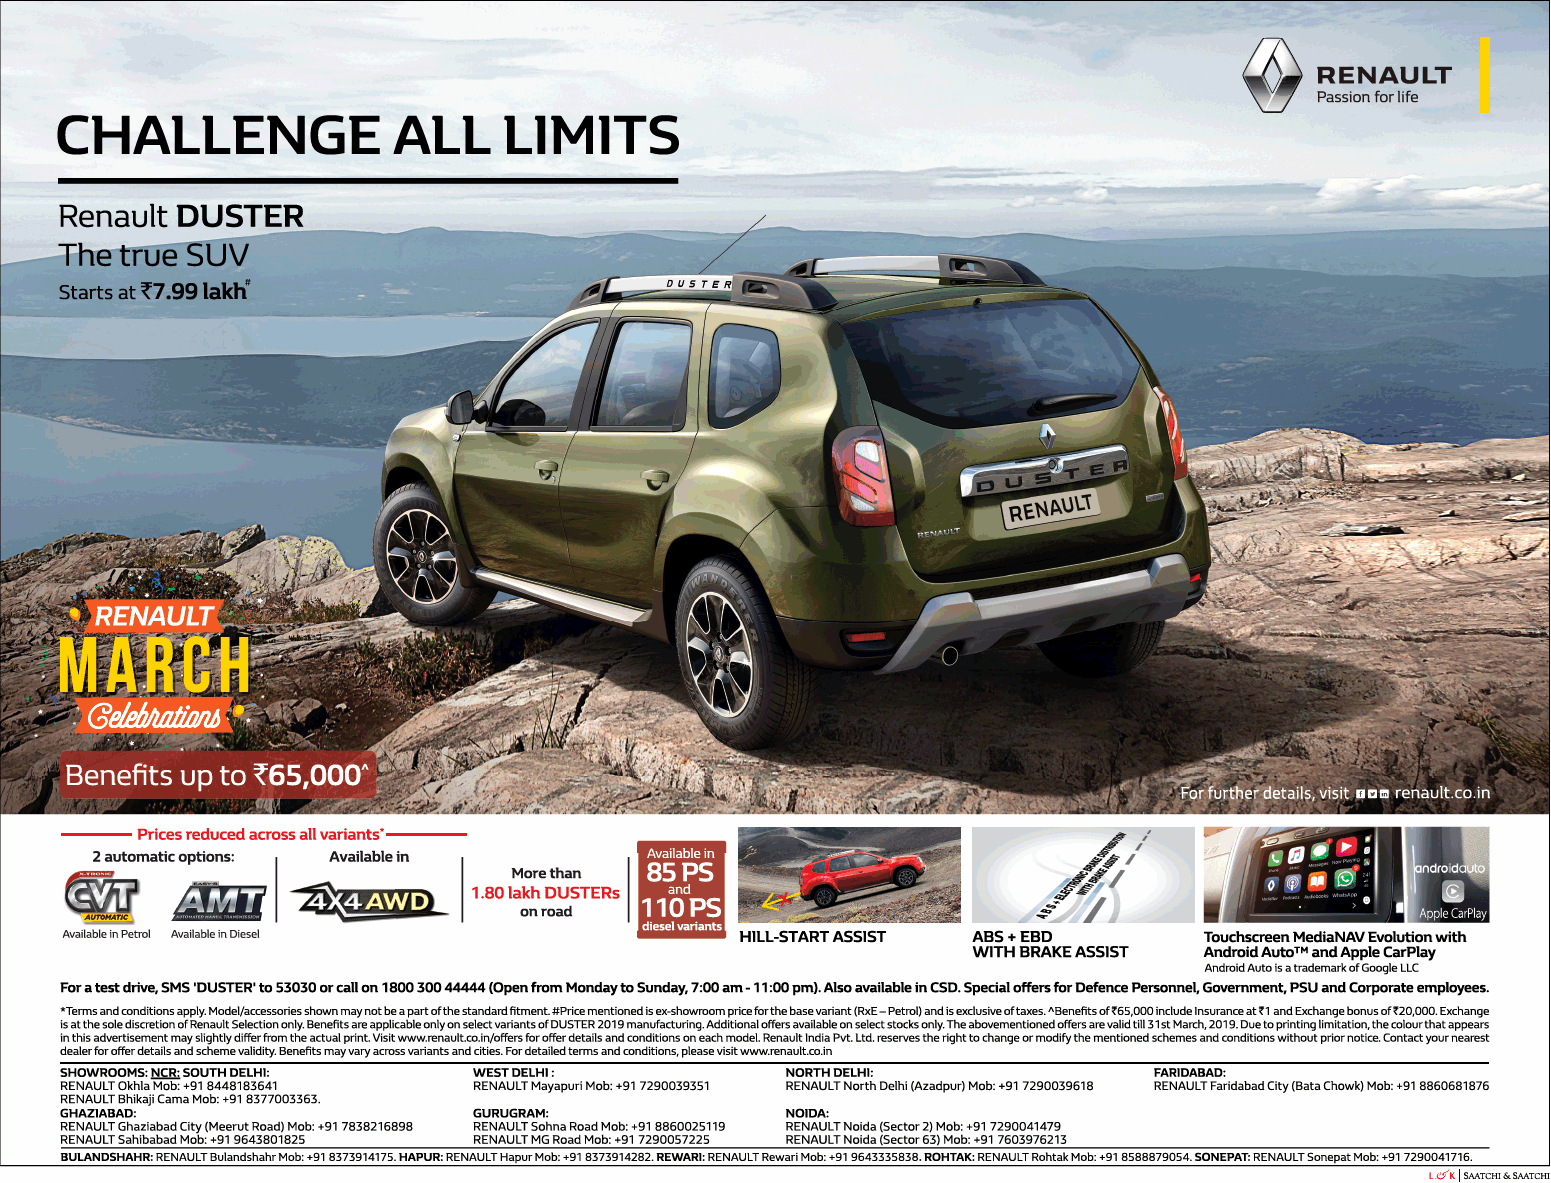 renault-duster-challenge-all-limits-ad-delhi-times-17-03-2019.png